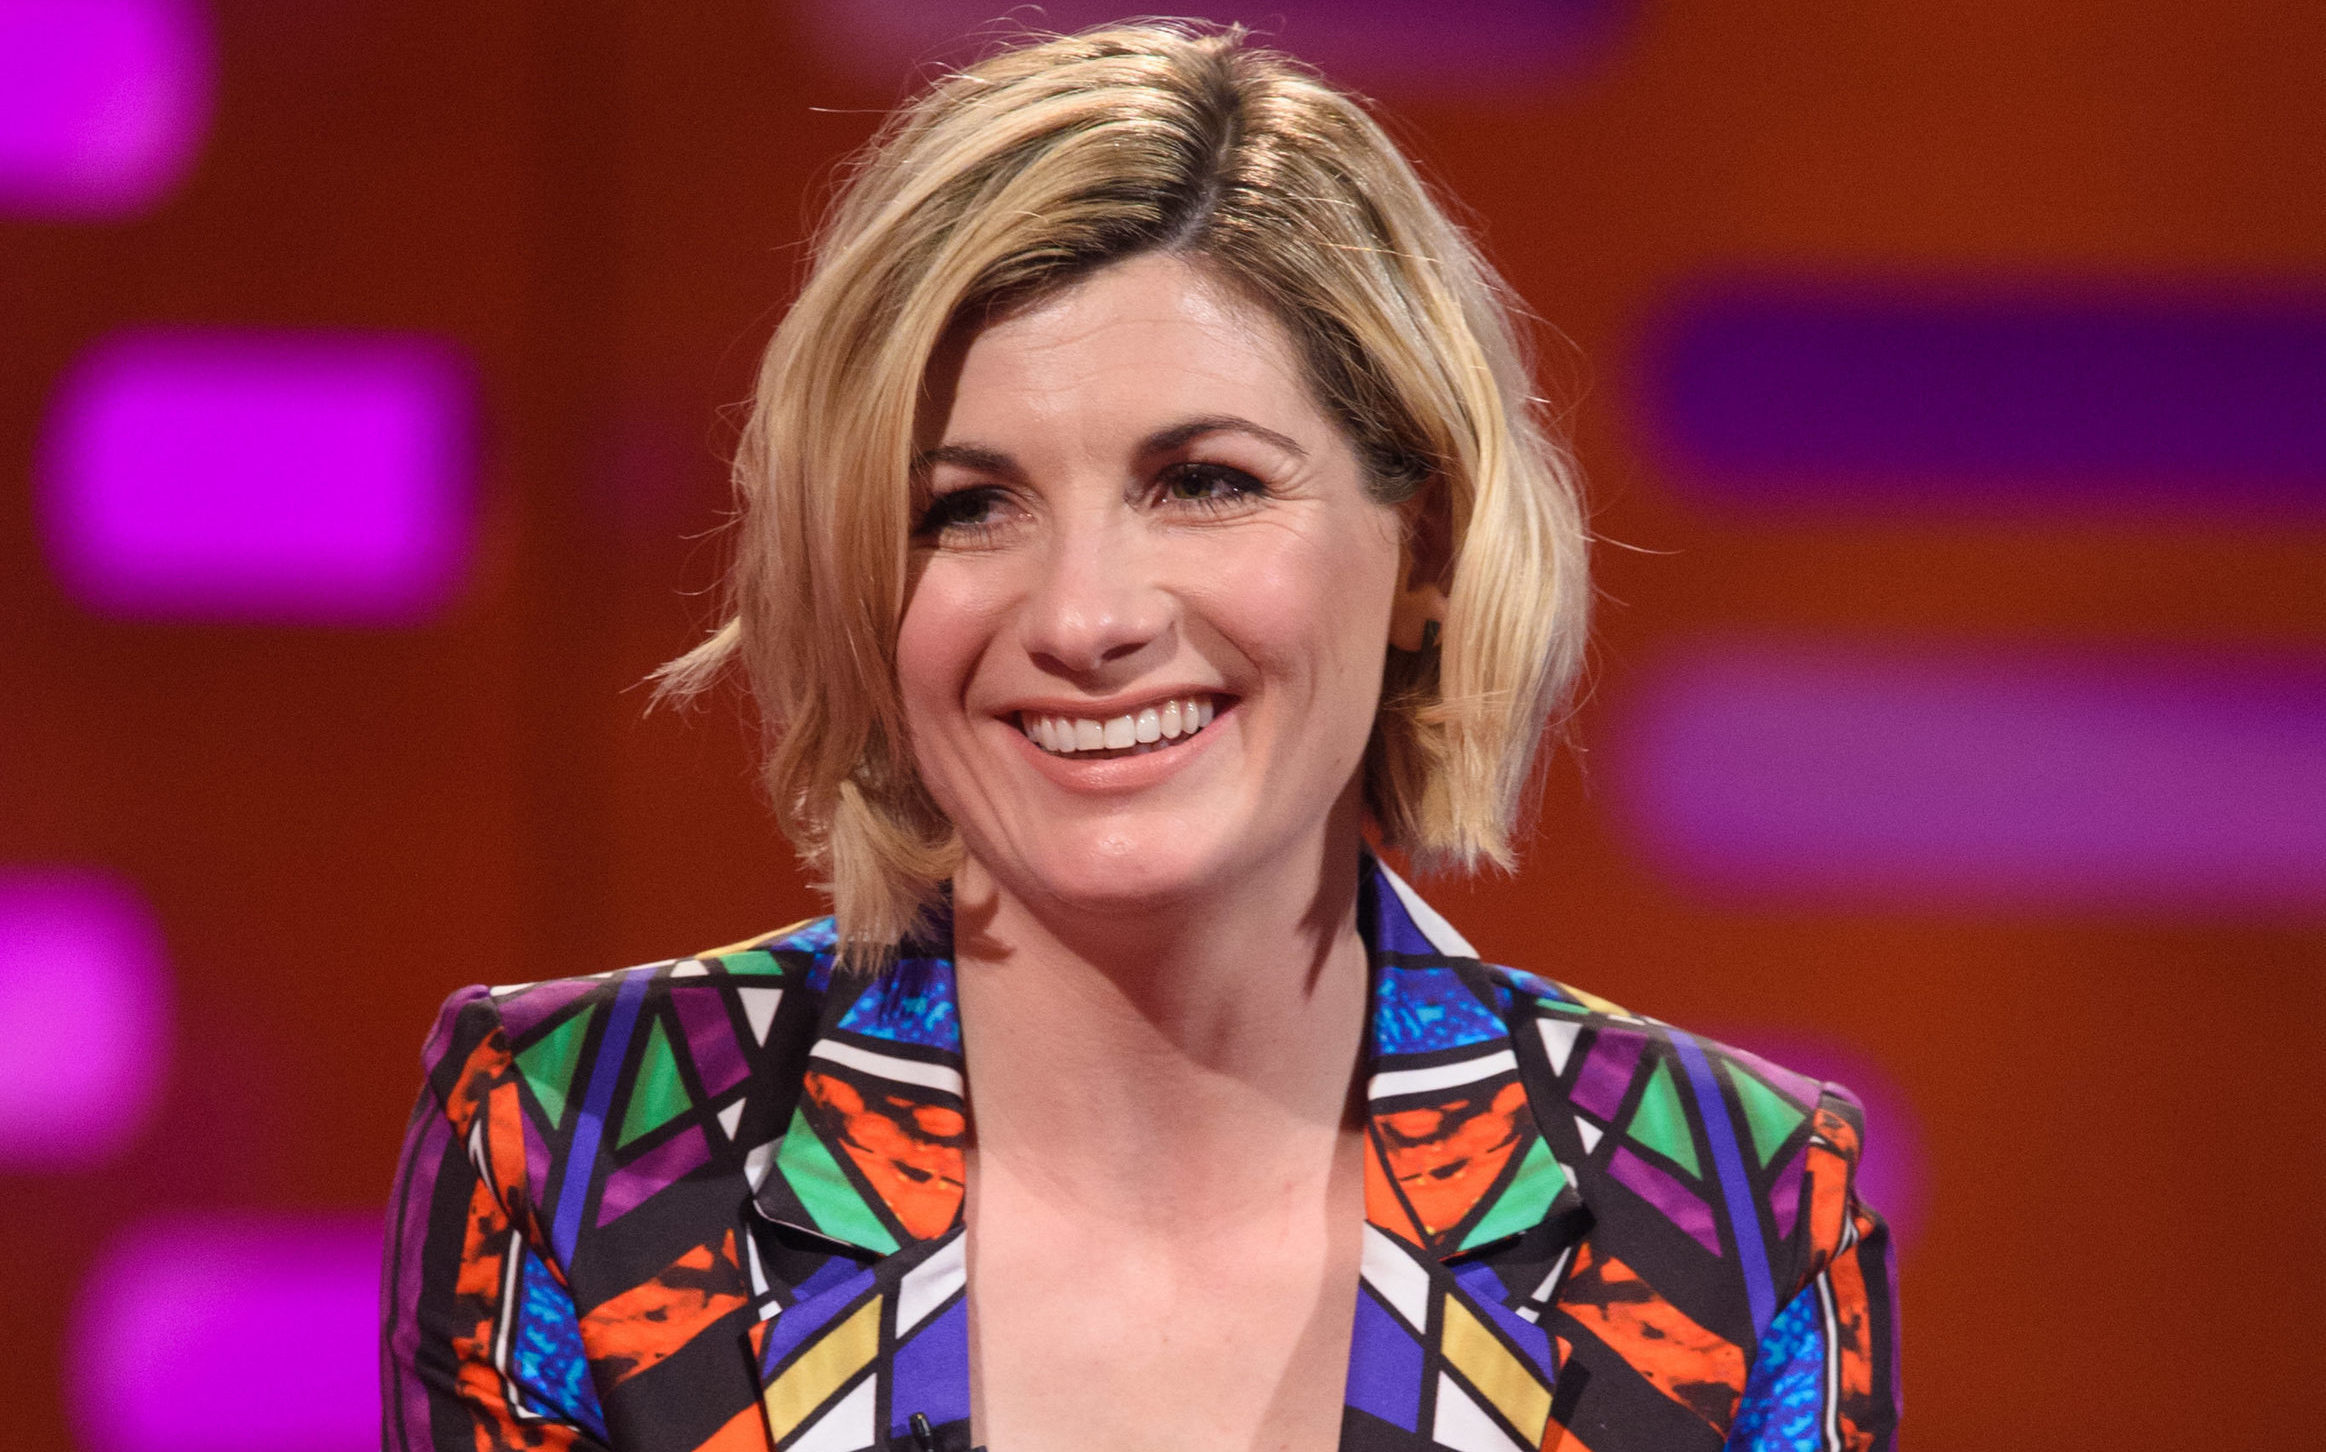 How tall is Jodie Whittaker?